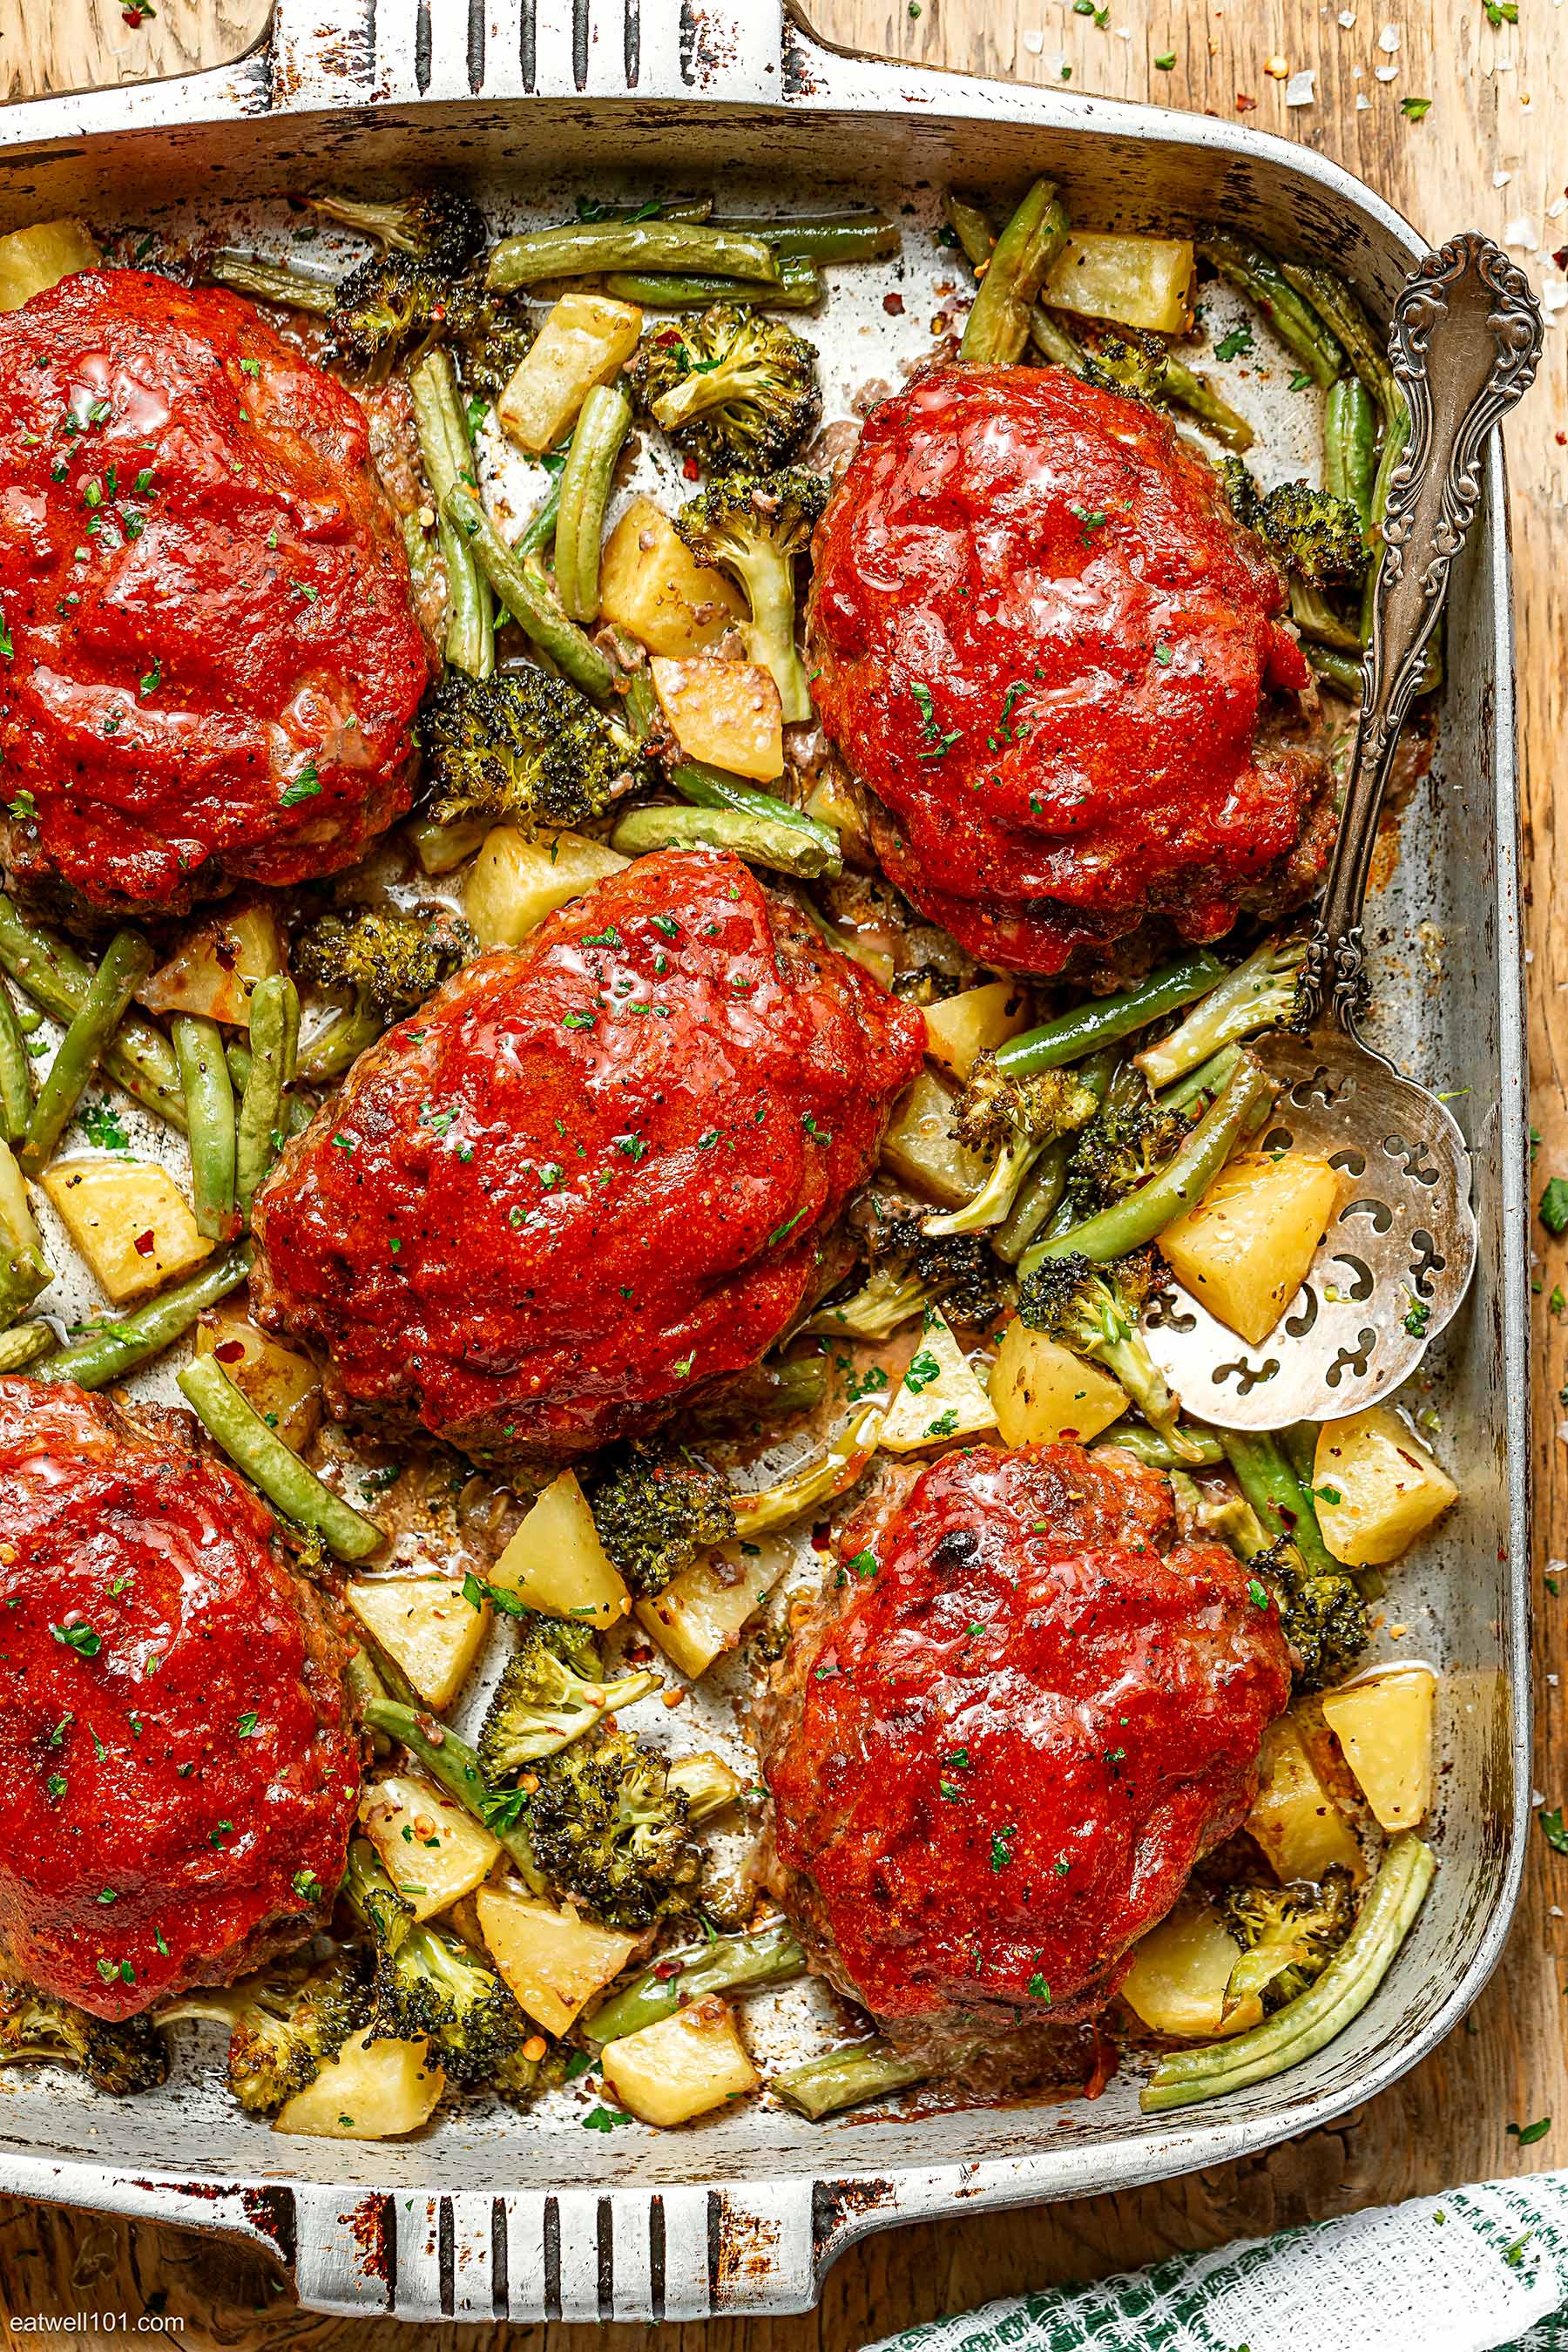 15 One Pan Recipes to Get You Excited for Dinner